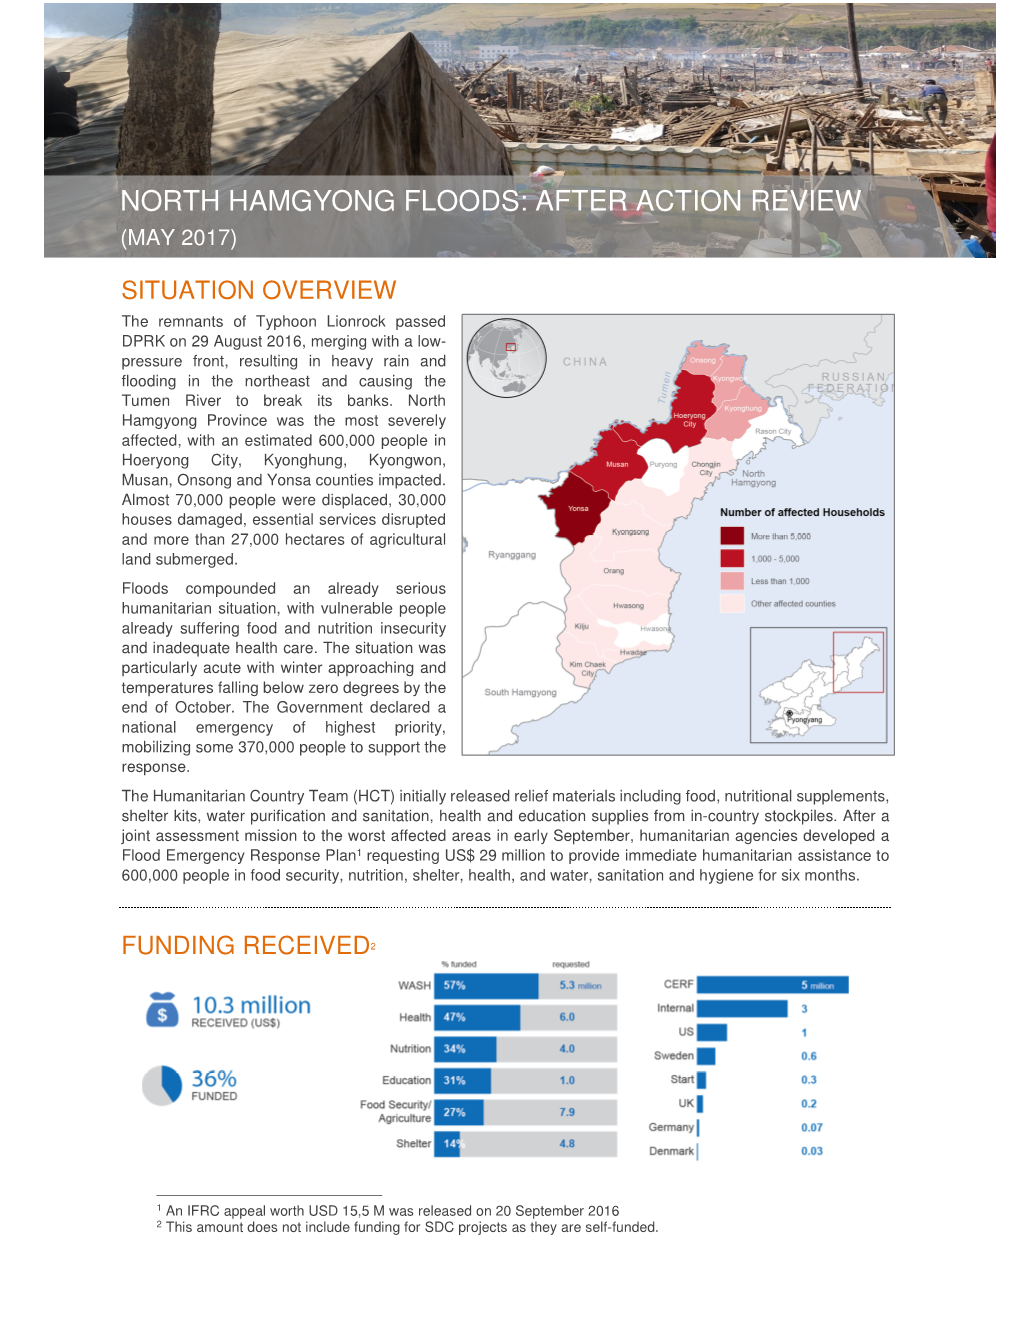 North Hamgyong Floods: After Action Review (May 2017)